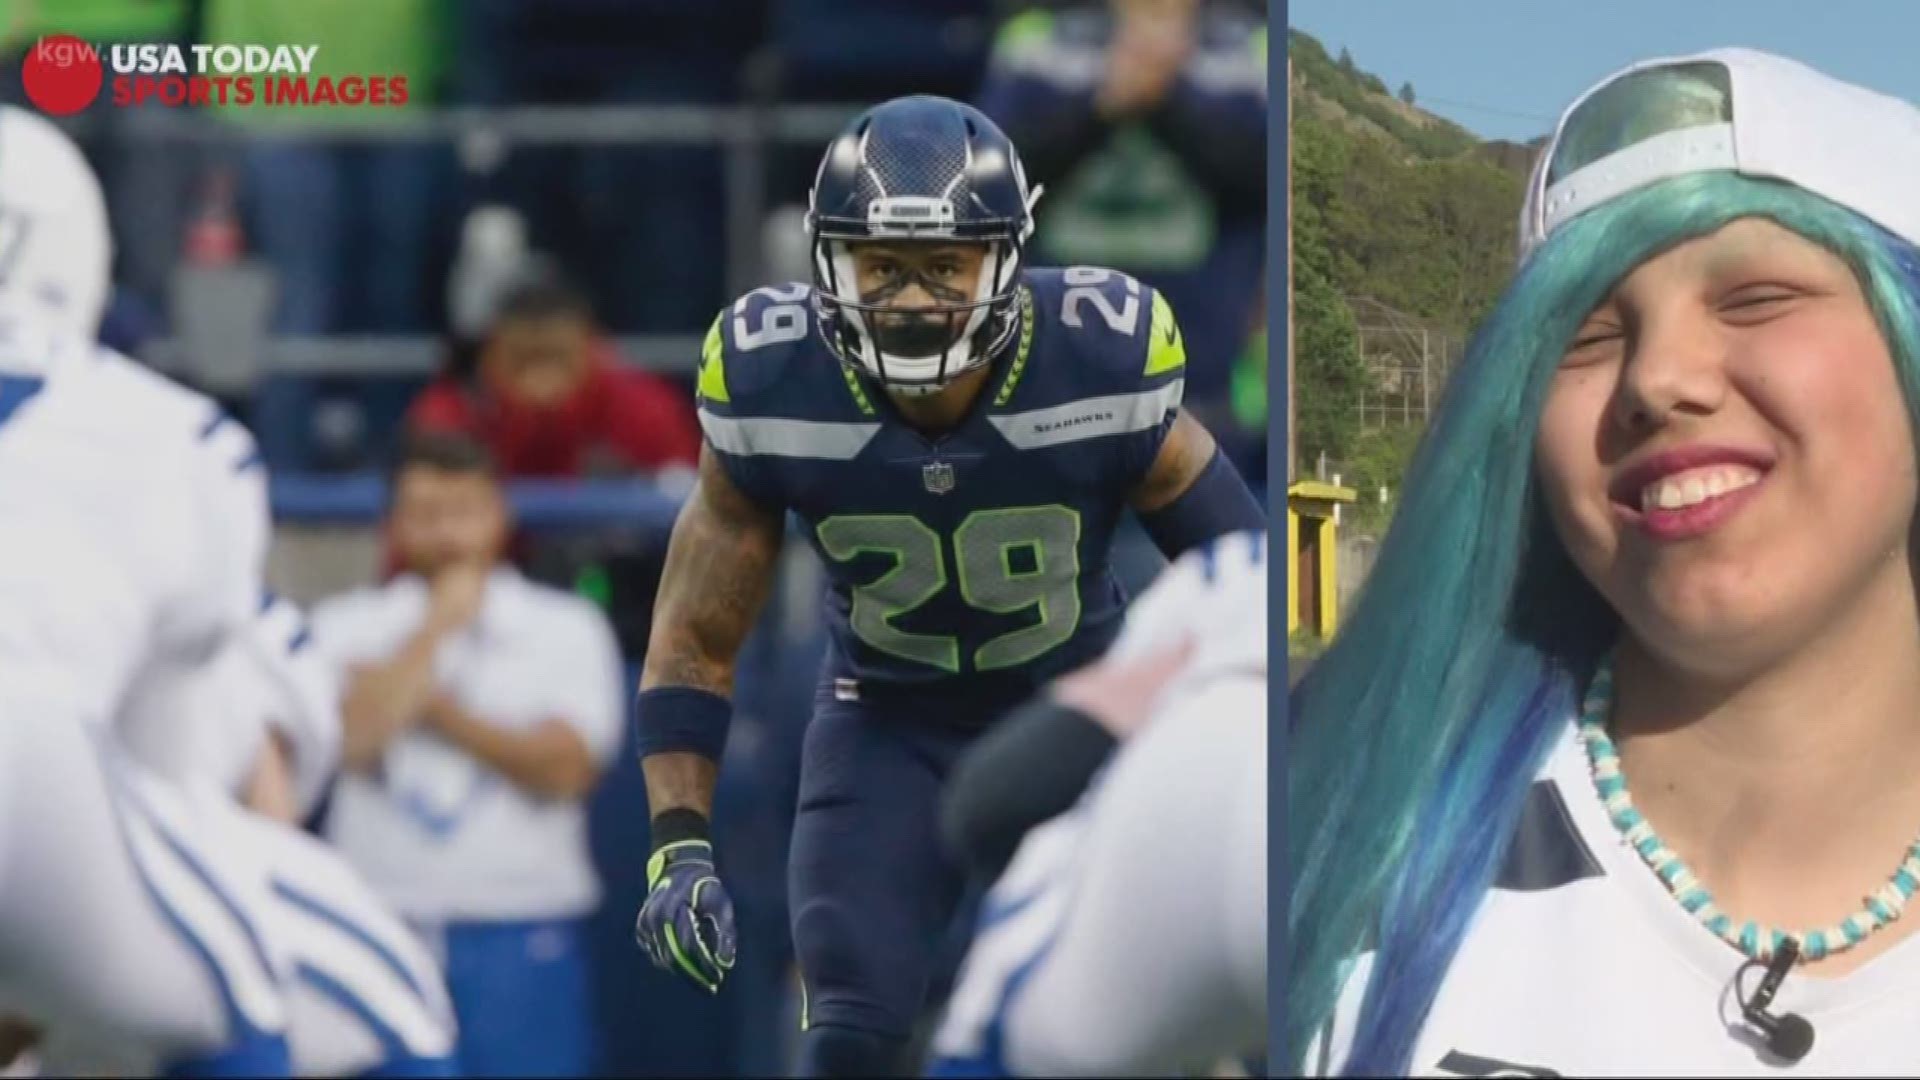 Teen hopes Seahawks player will be prom date